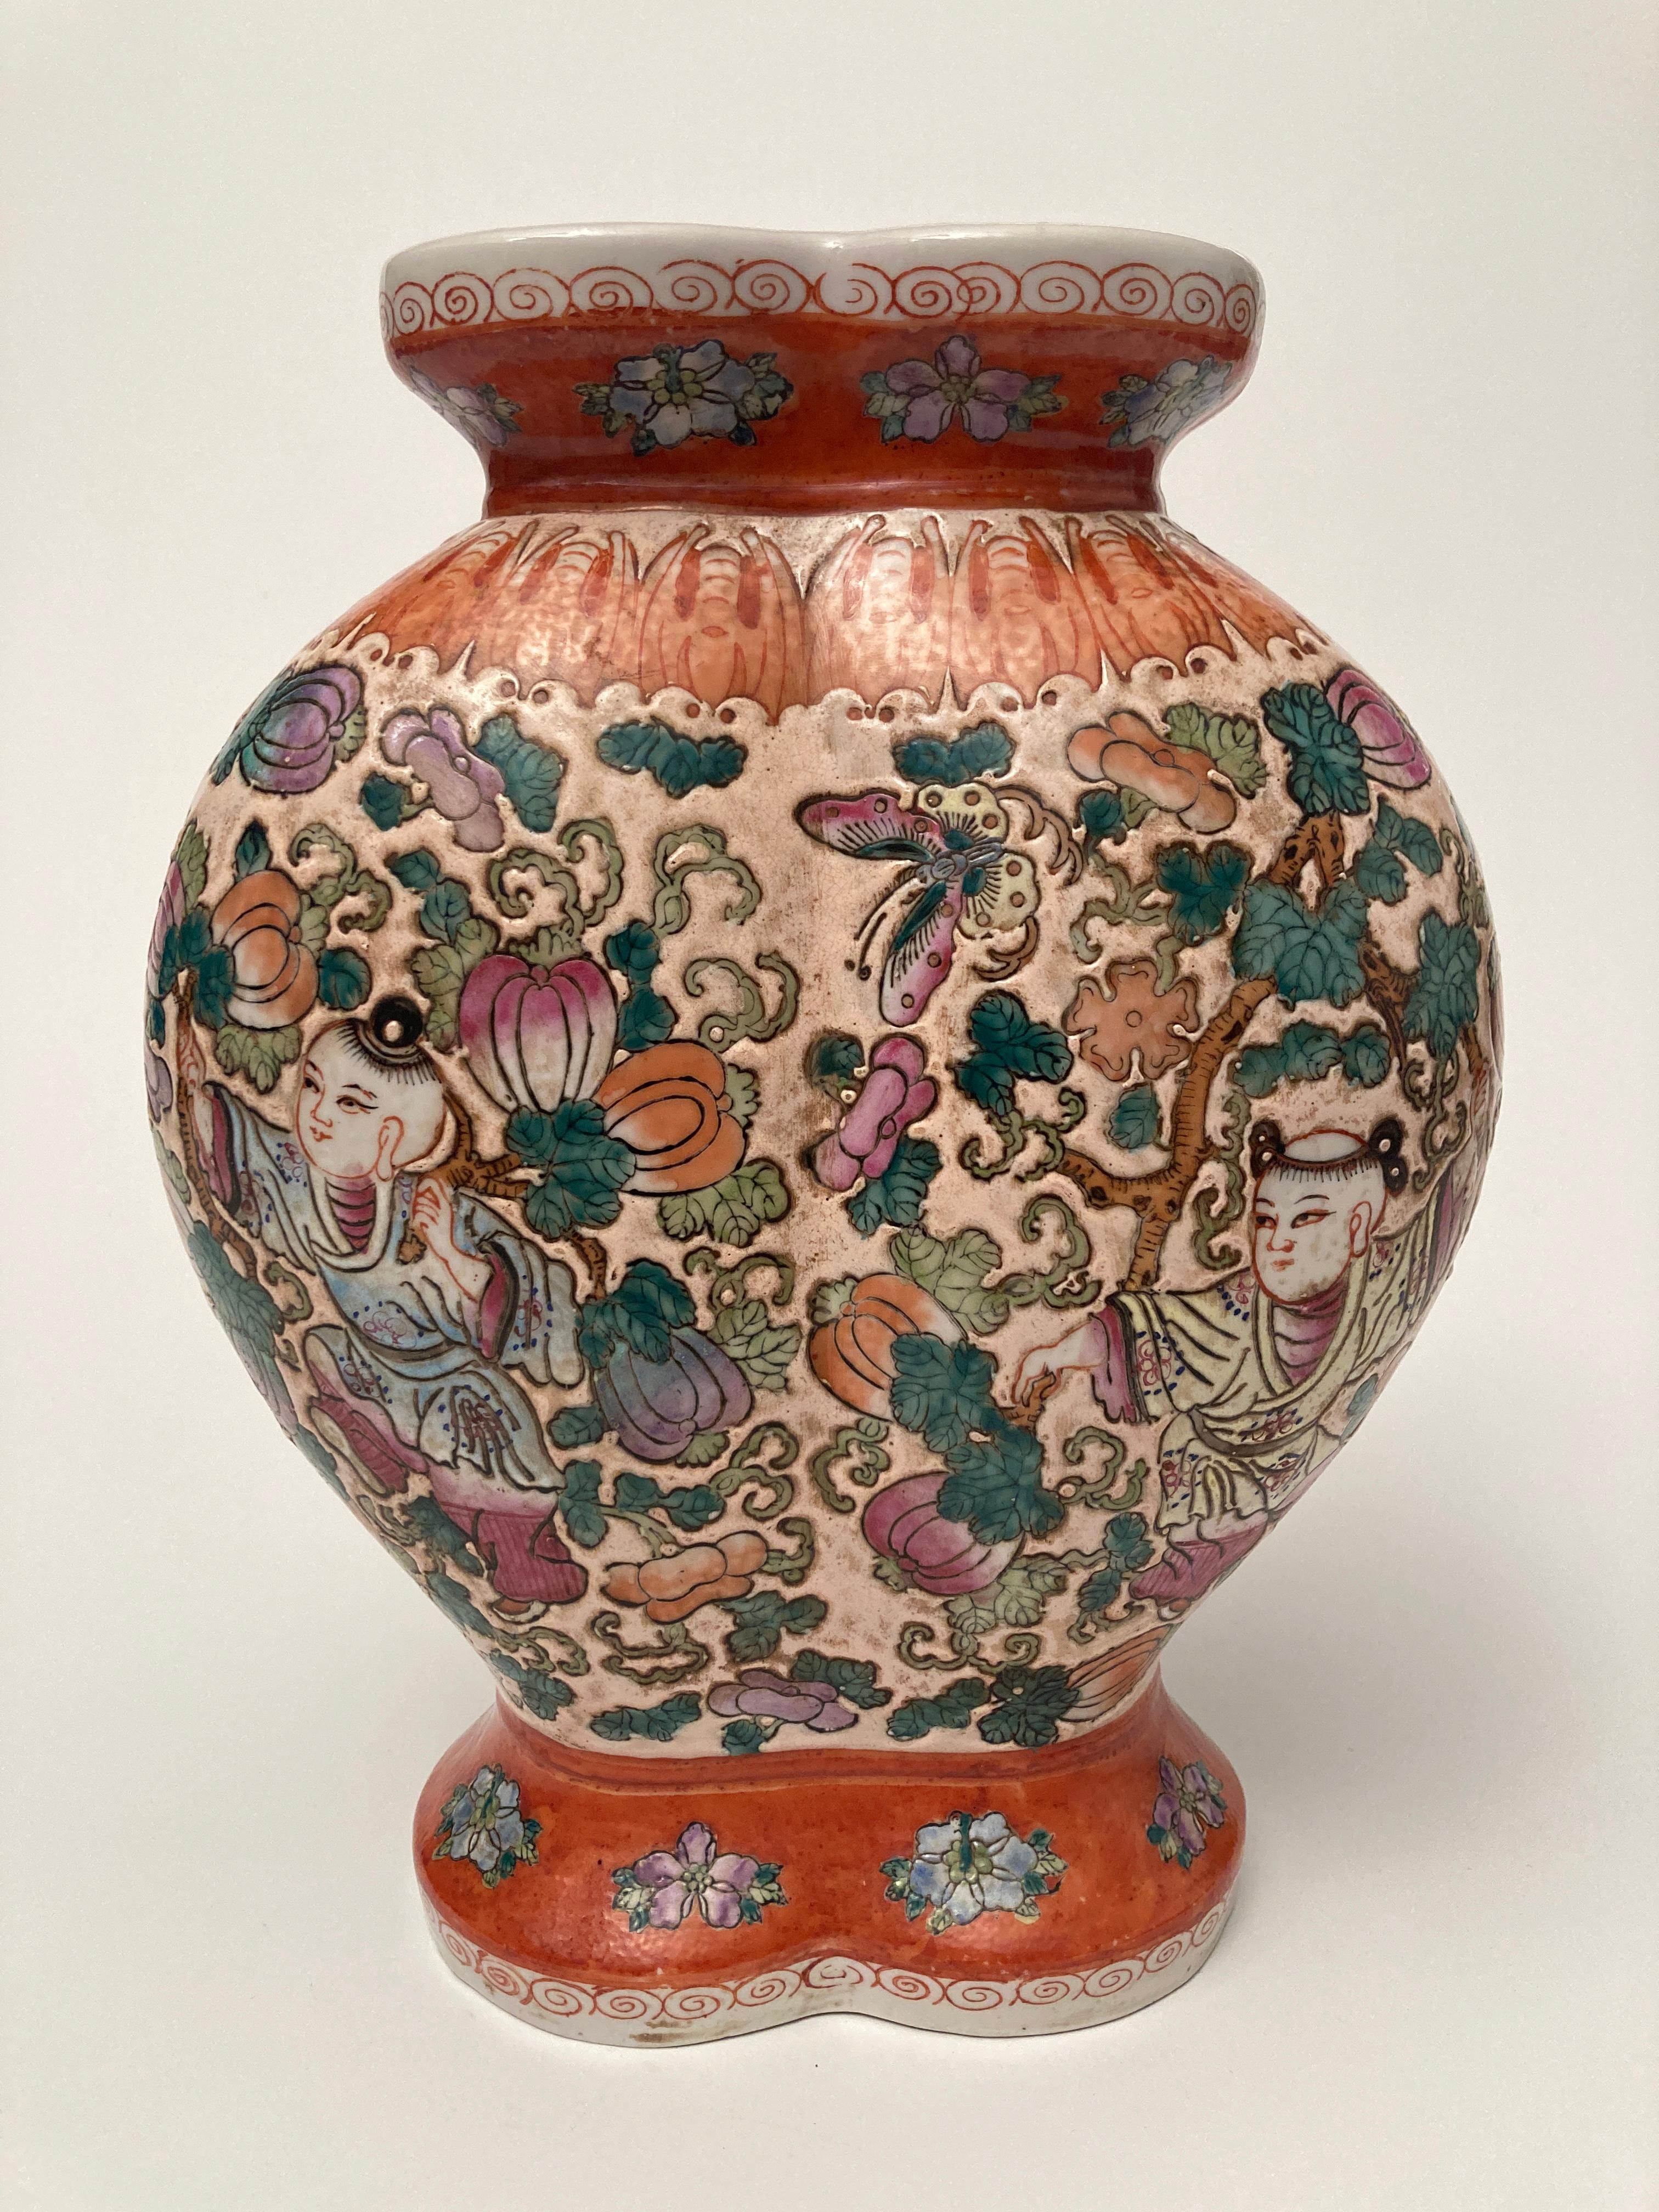 This stunningly enameled porcelain vase has a double mouth opening with hand-painted images of boys playing among the vines, gourds and gourd blossoms. There is a border of bat-like figures above the playful garden images with a finishing trim of